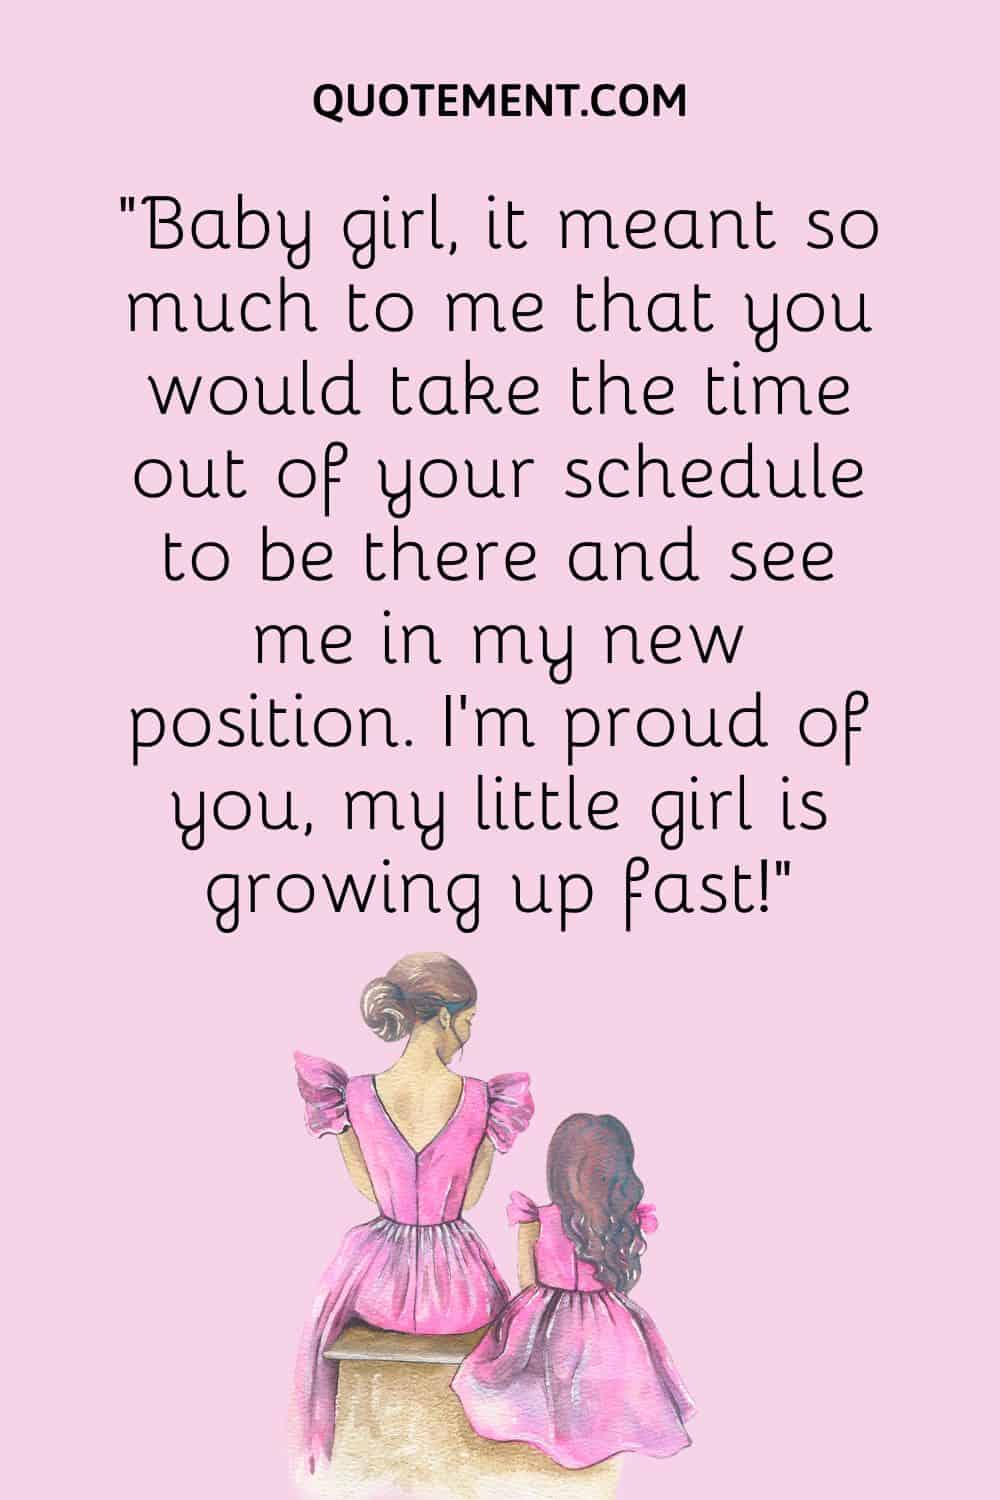 “Baby girl, it meant so much to me that you would take the time out of your schedule to be there and see me in my new position. I’m proud of you, my little girl is growing up fast!”